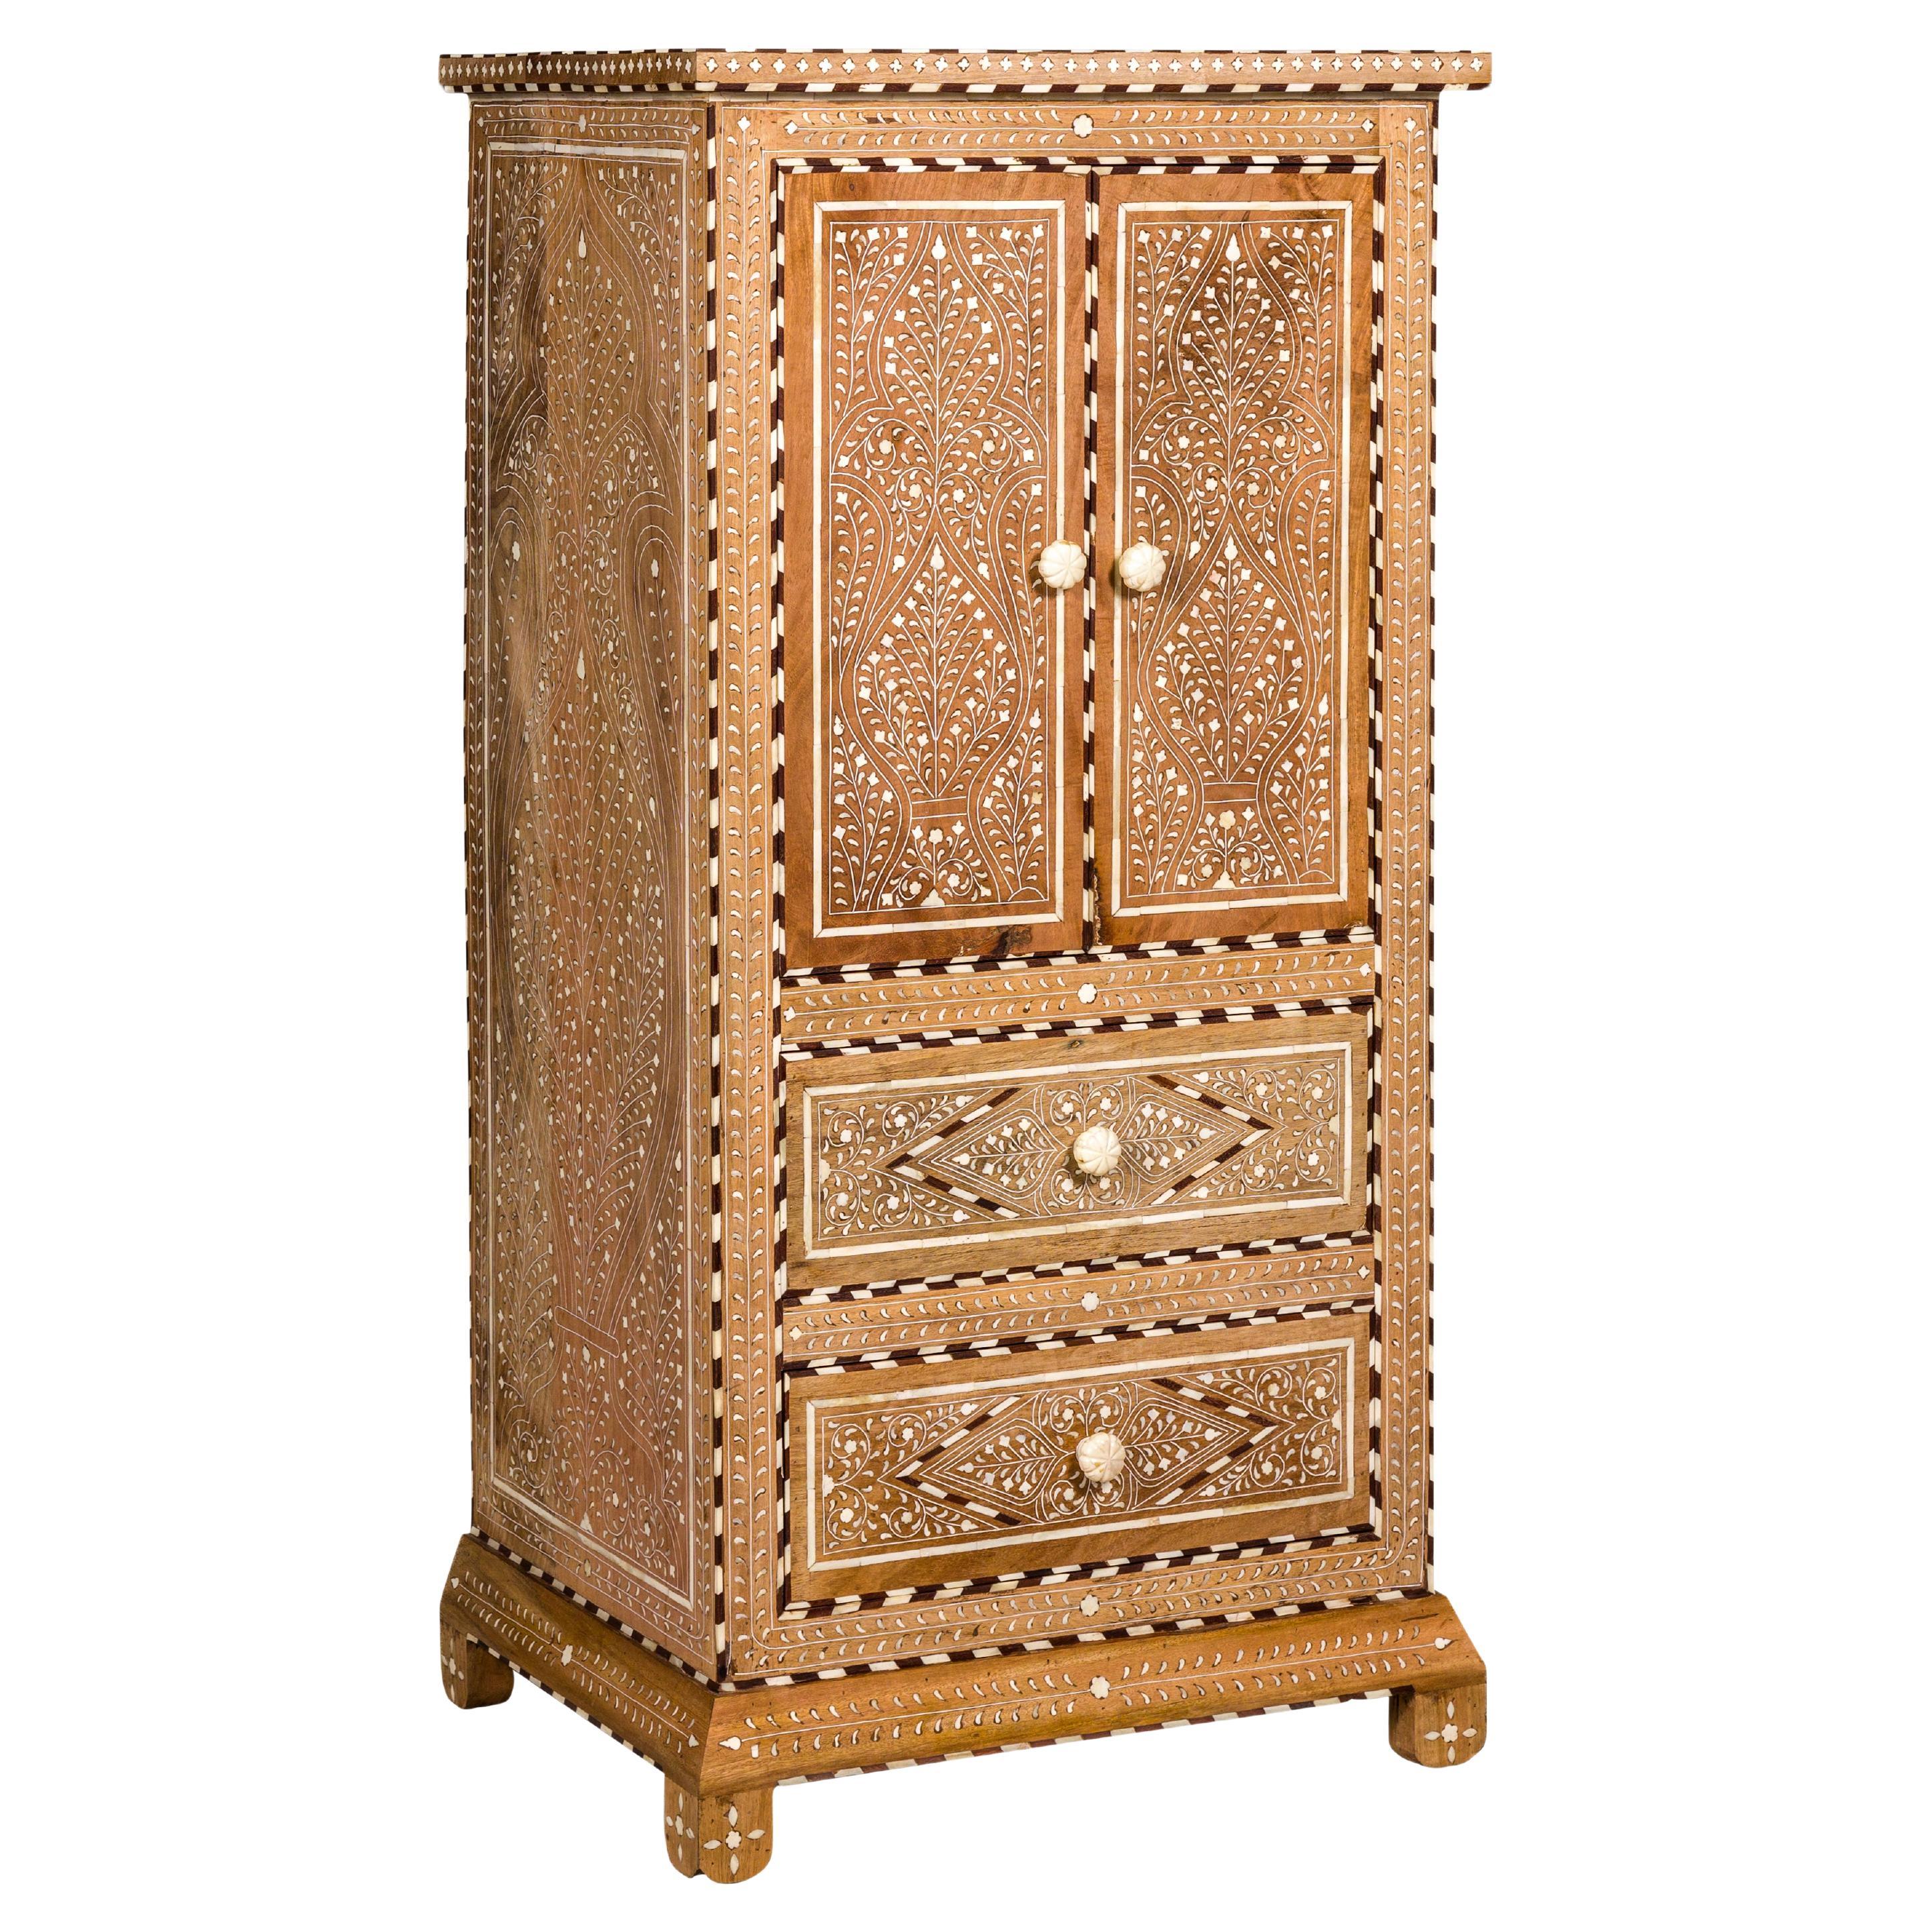 Anglo Indian Style Narrow Cabinet with Foliage-Themed Bone Inlaid Décor For Sale